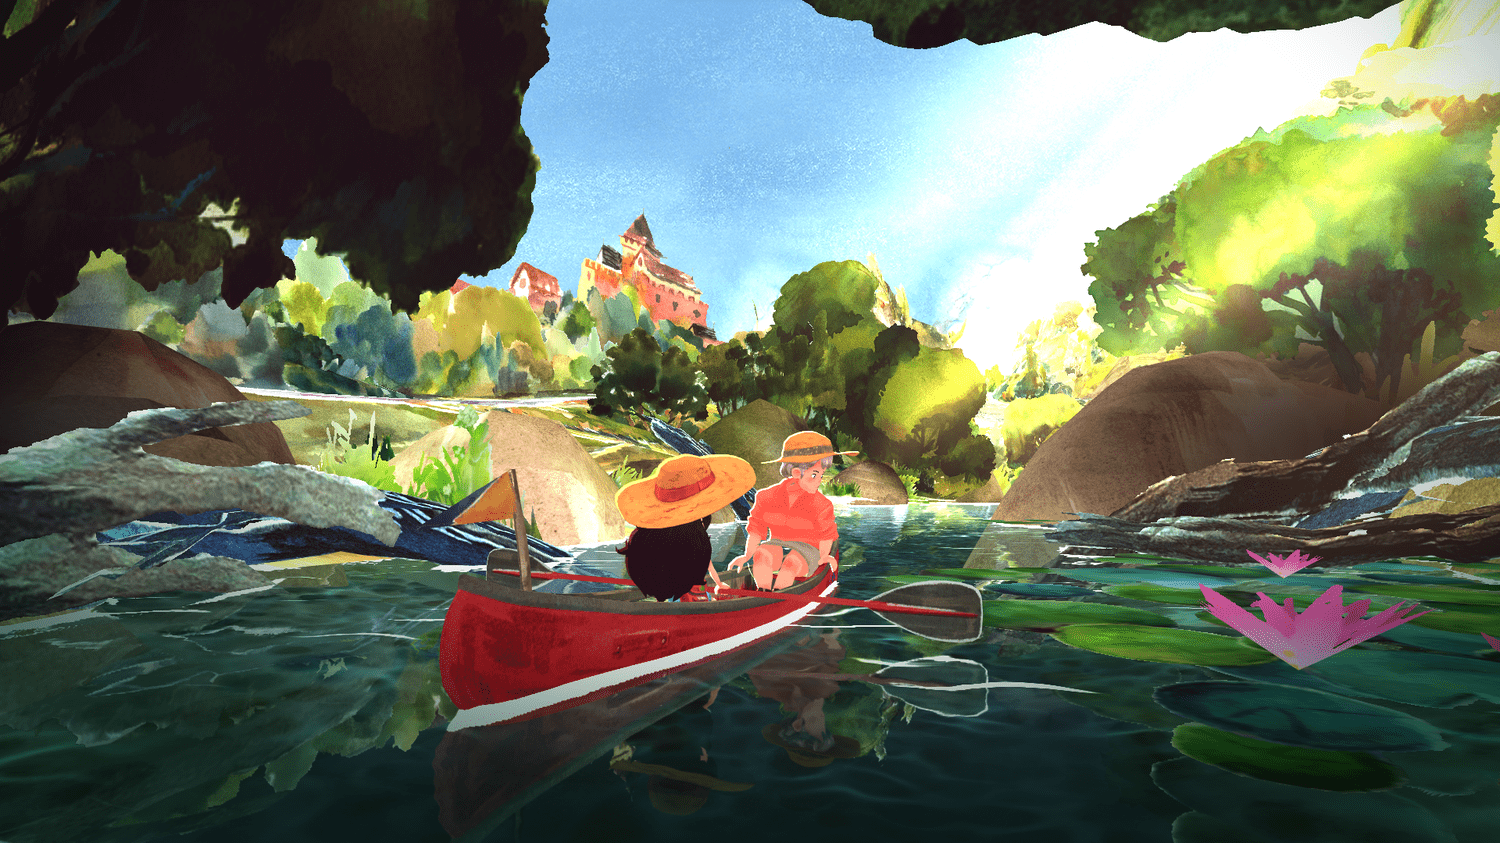 « Dordogne » : A delightful summer video game with mesmerizing watercolor art